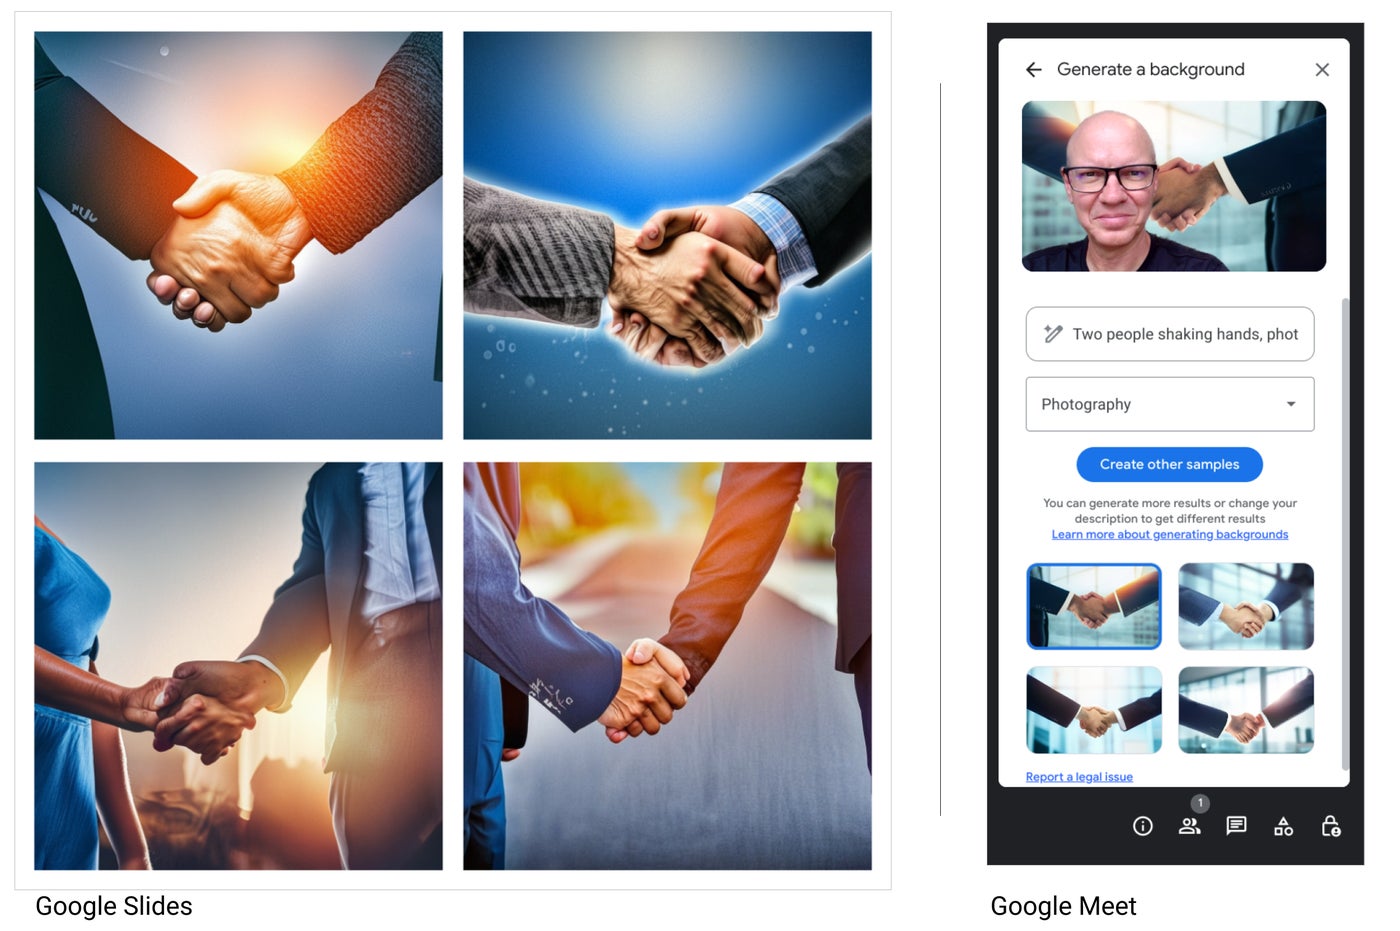 Duet AI generated handshake images for Google Slide and Google Meet.